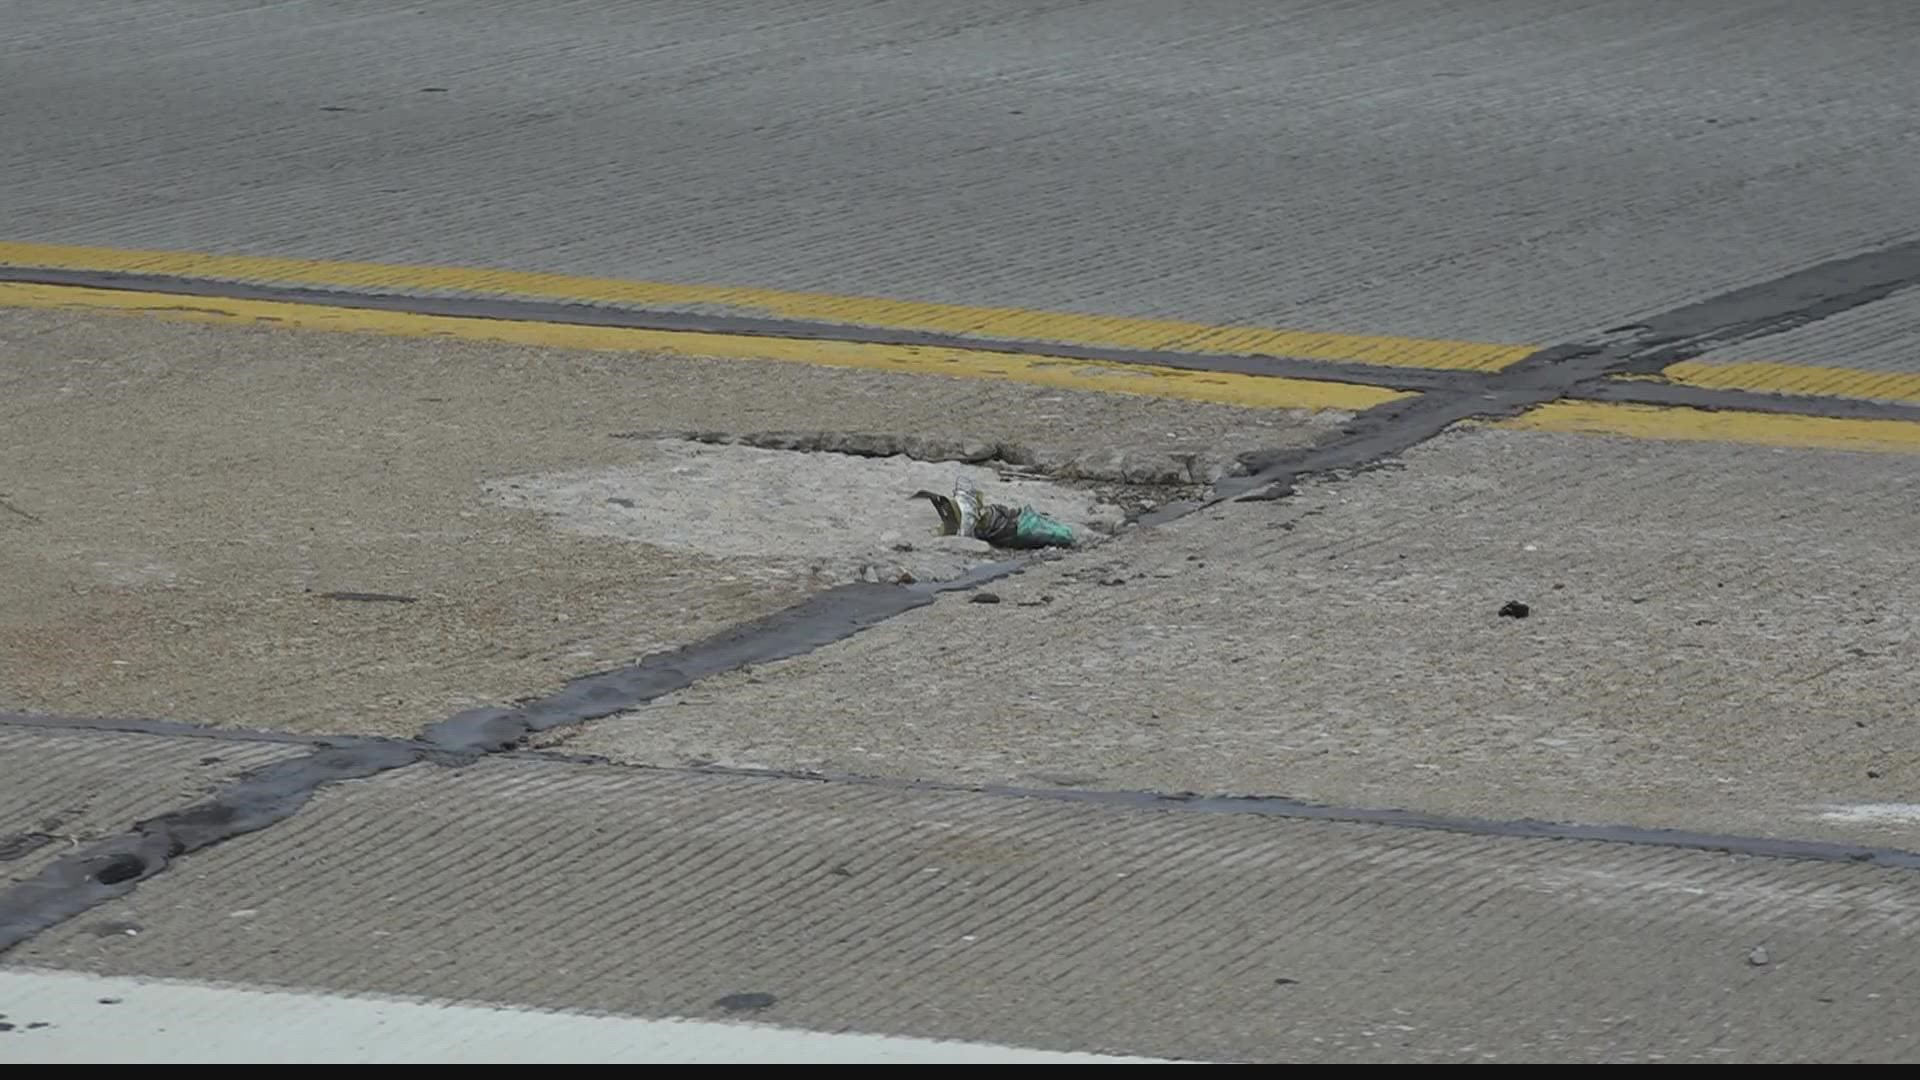 Pothole season is here. The key to getting them repaired is reporting them. Here's how.